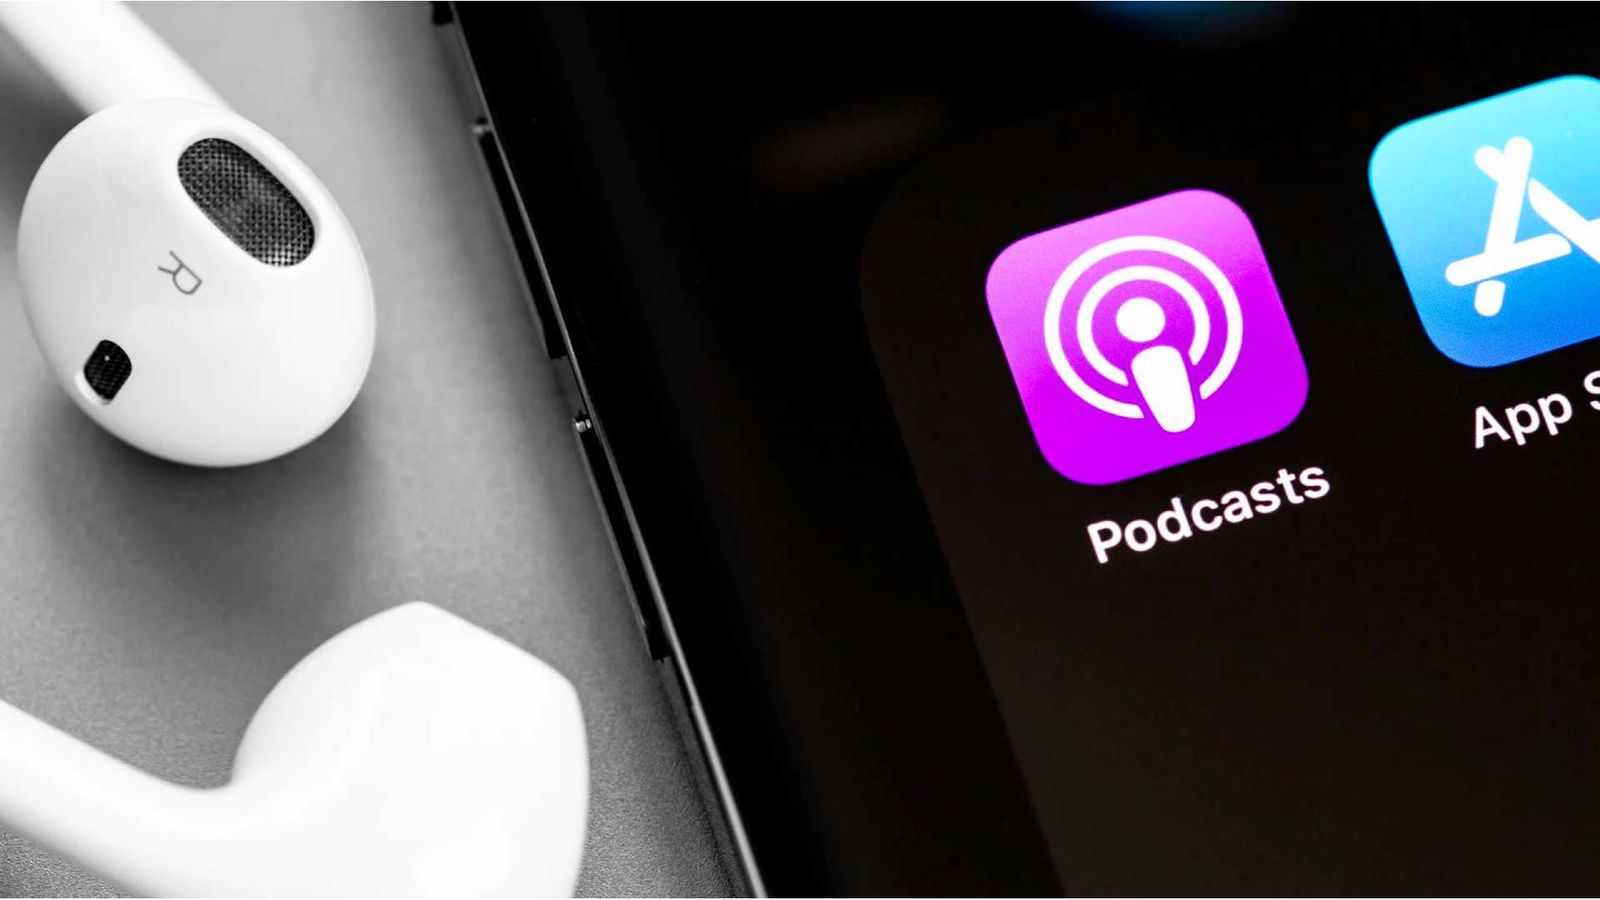 Apple Podcasts not working - fix downloading and connection issues